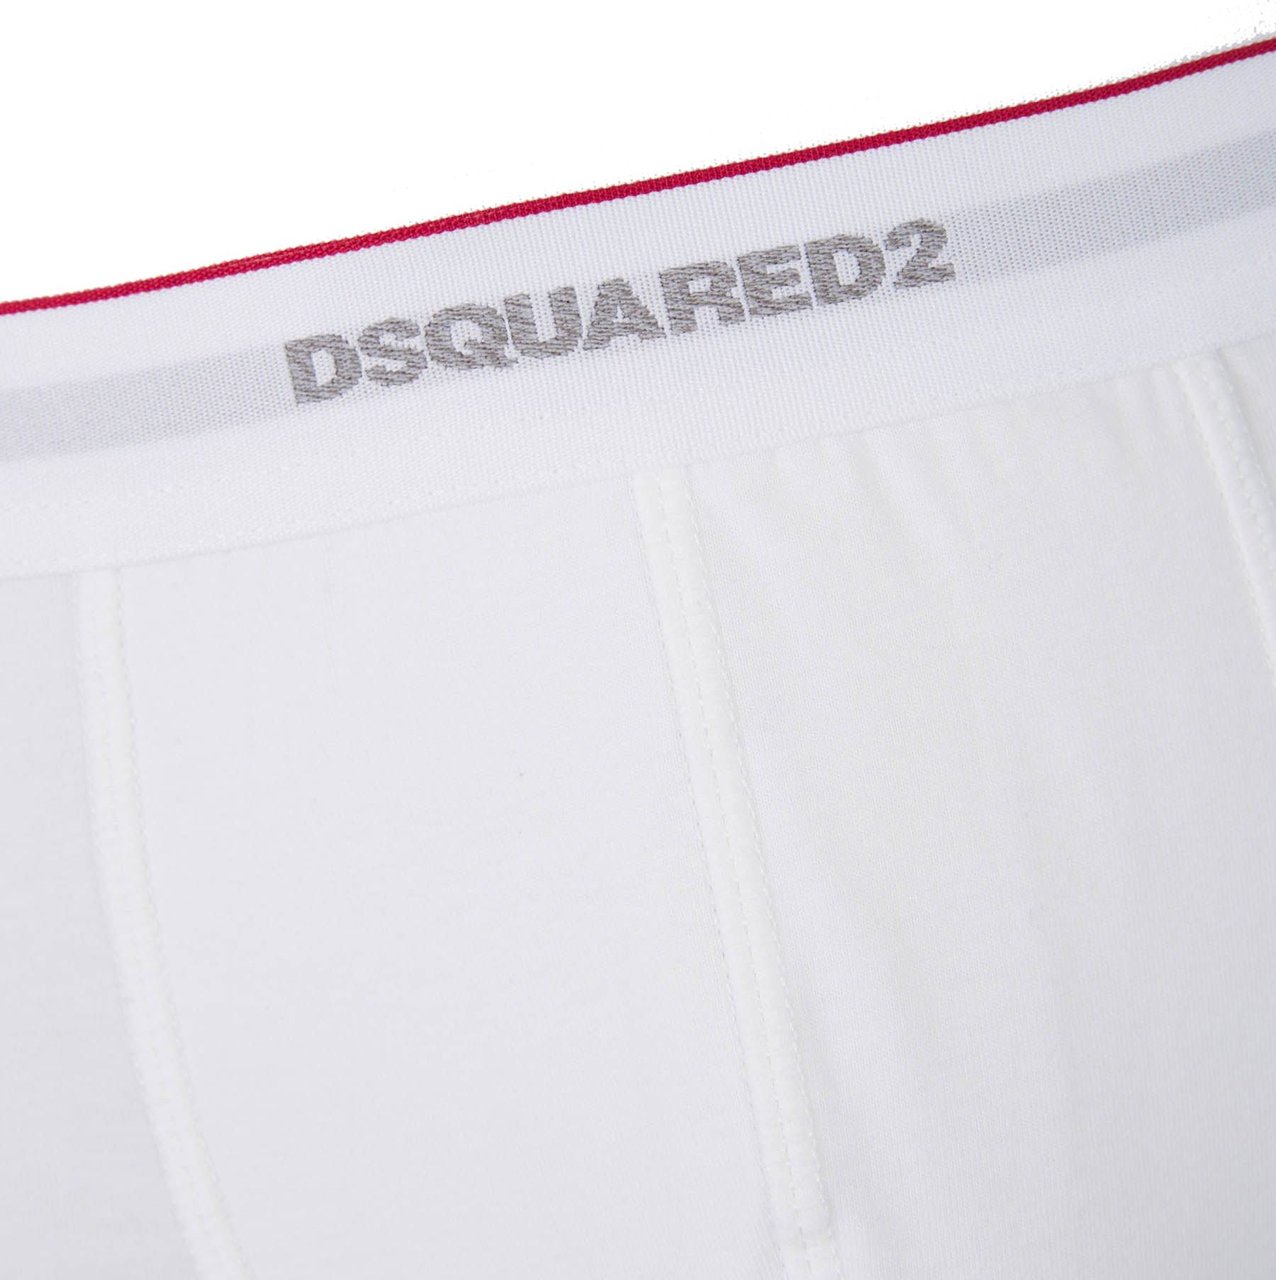 Dsquared2 Tri-Pack Boxer Wit